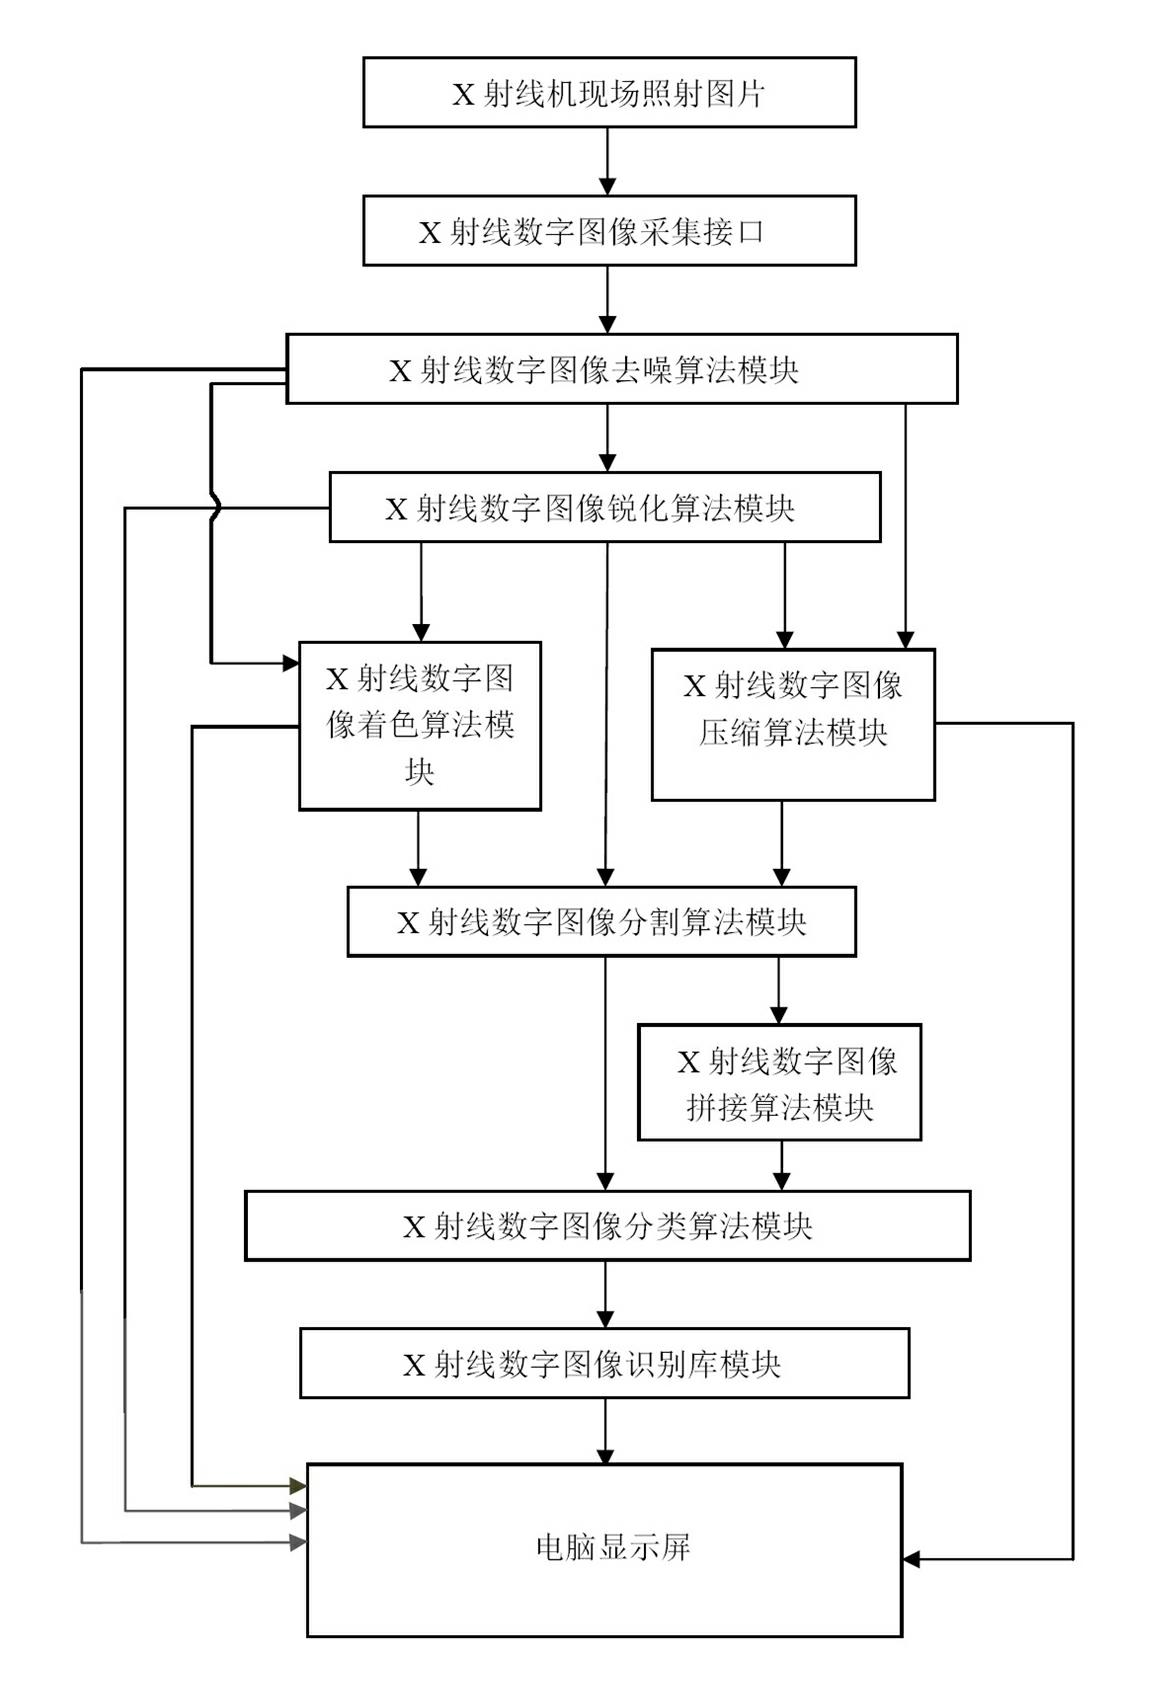 Electrical equipment X ray digital image processing algorithm support system